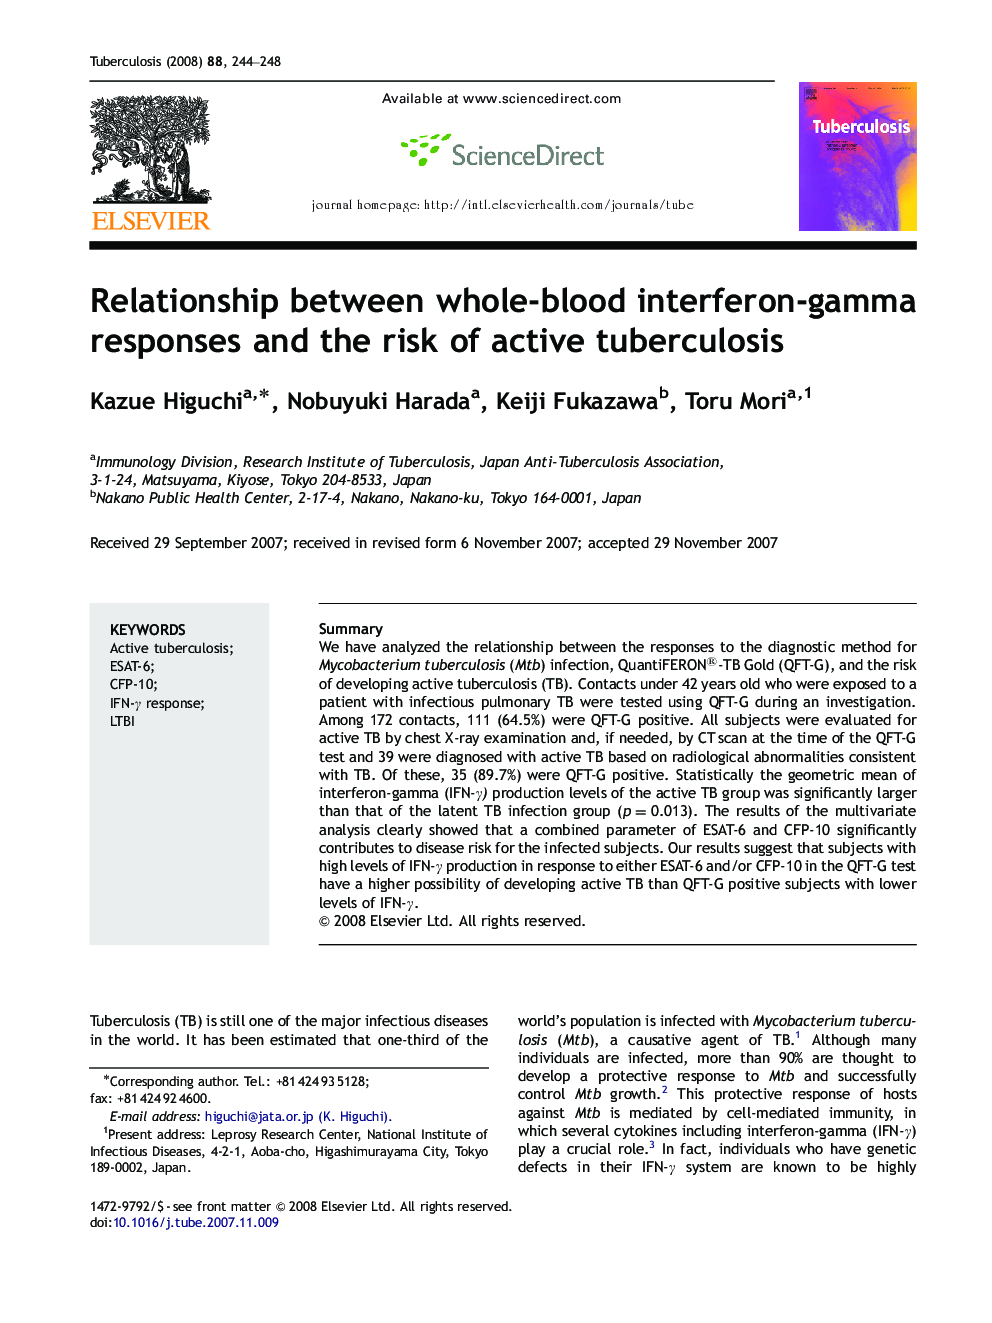 Relationship between whole-blood interferon-gamma responses and the risk of active tuberculosis